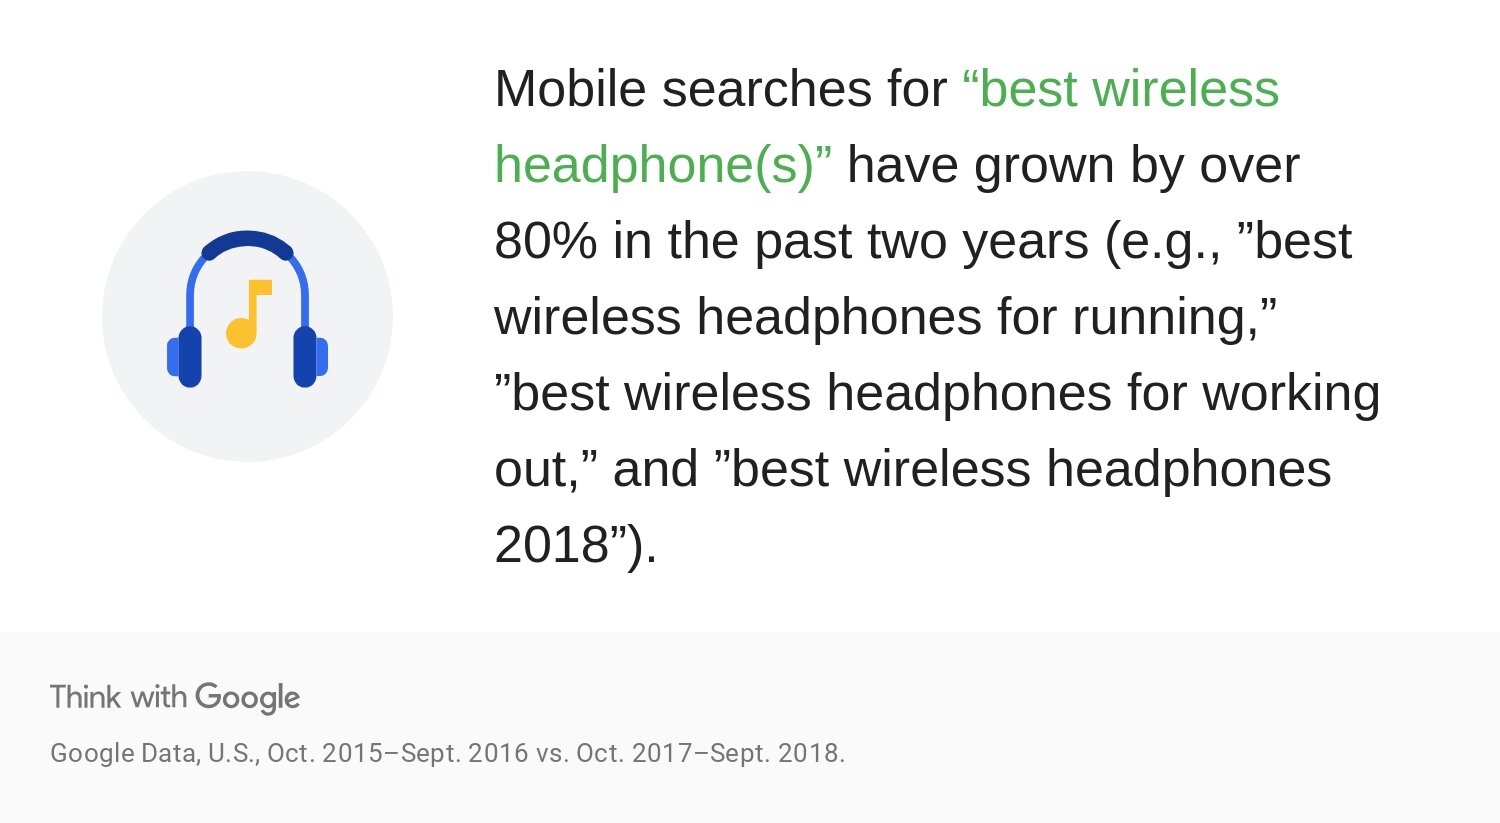 hMBNq-data-mobile-searches-for-best-wireless-headphones-download.jpg